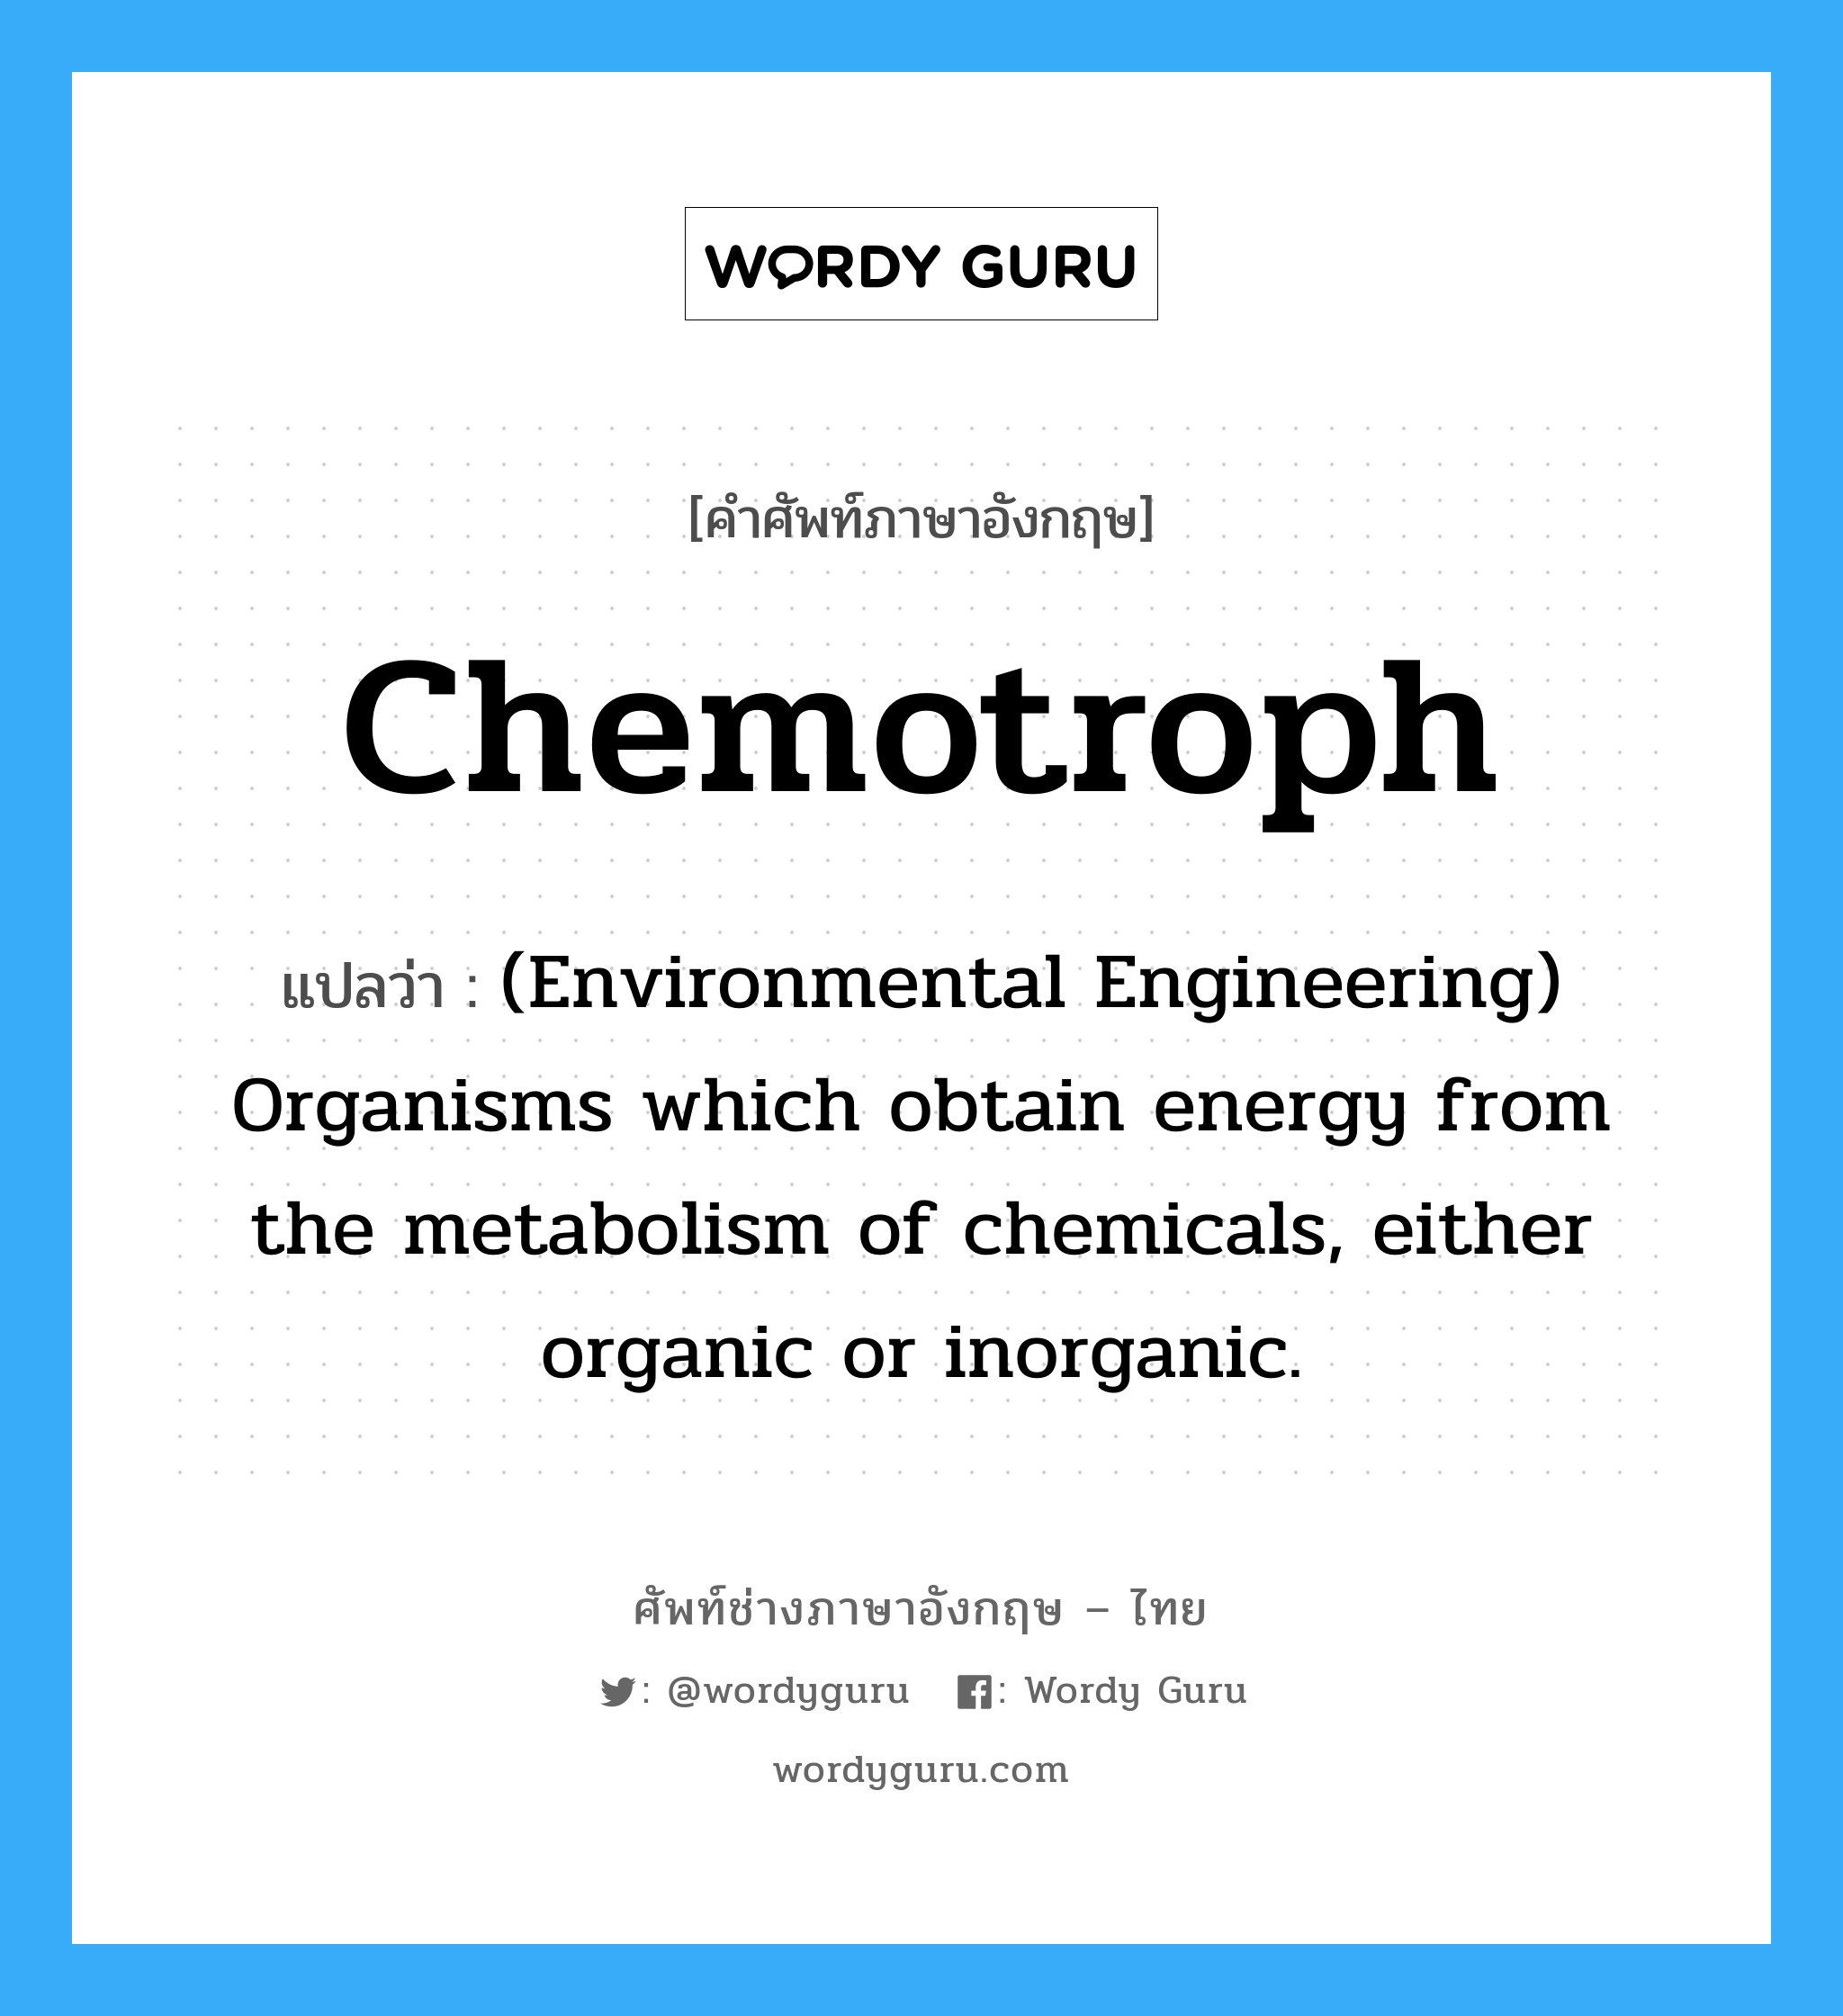 Chemotroph แปลว่า?, คำศัพท์ช่างภาษาอังกฤษ - ไทย Chemotroph คำศัพท์ภาษาอังกฤษ Chemotroph แปลว่า (Environmental Engineering) Organisms which obtain energy from the metabolism of chemicals, either organic or inorganic.